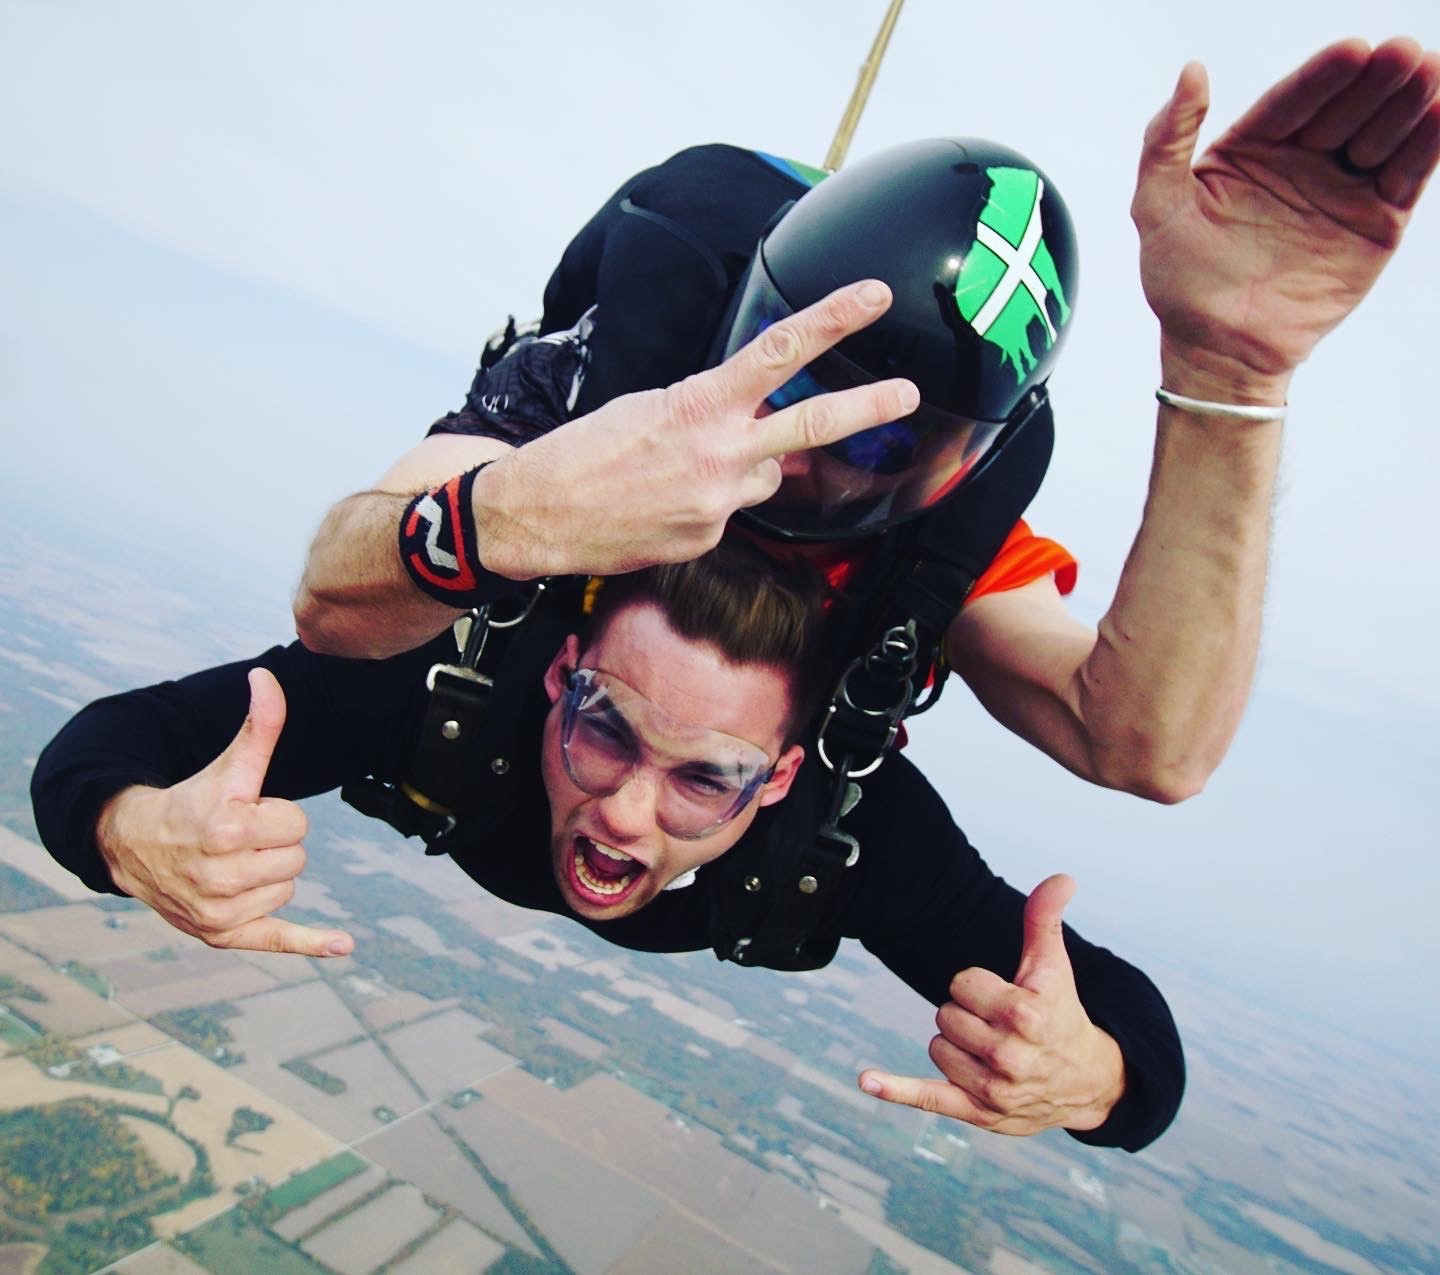 Photo of Michael skydiving. Michael plans to get his license after doing 10 skydiving jumps so he can jump on his own.